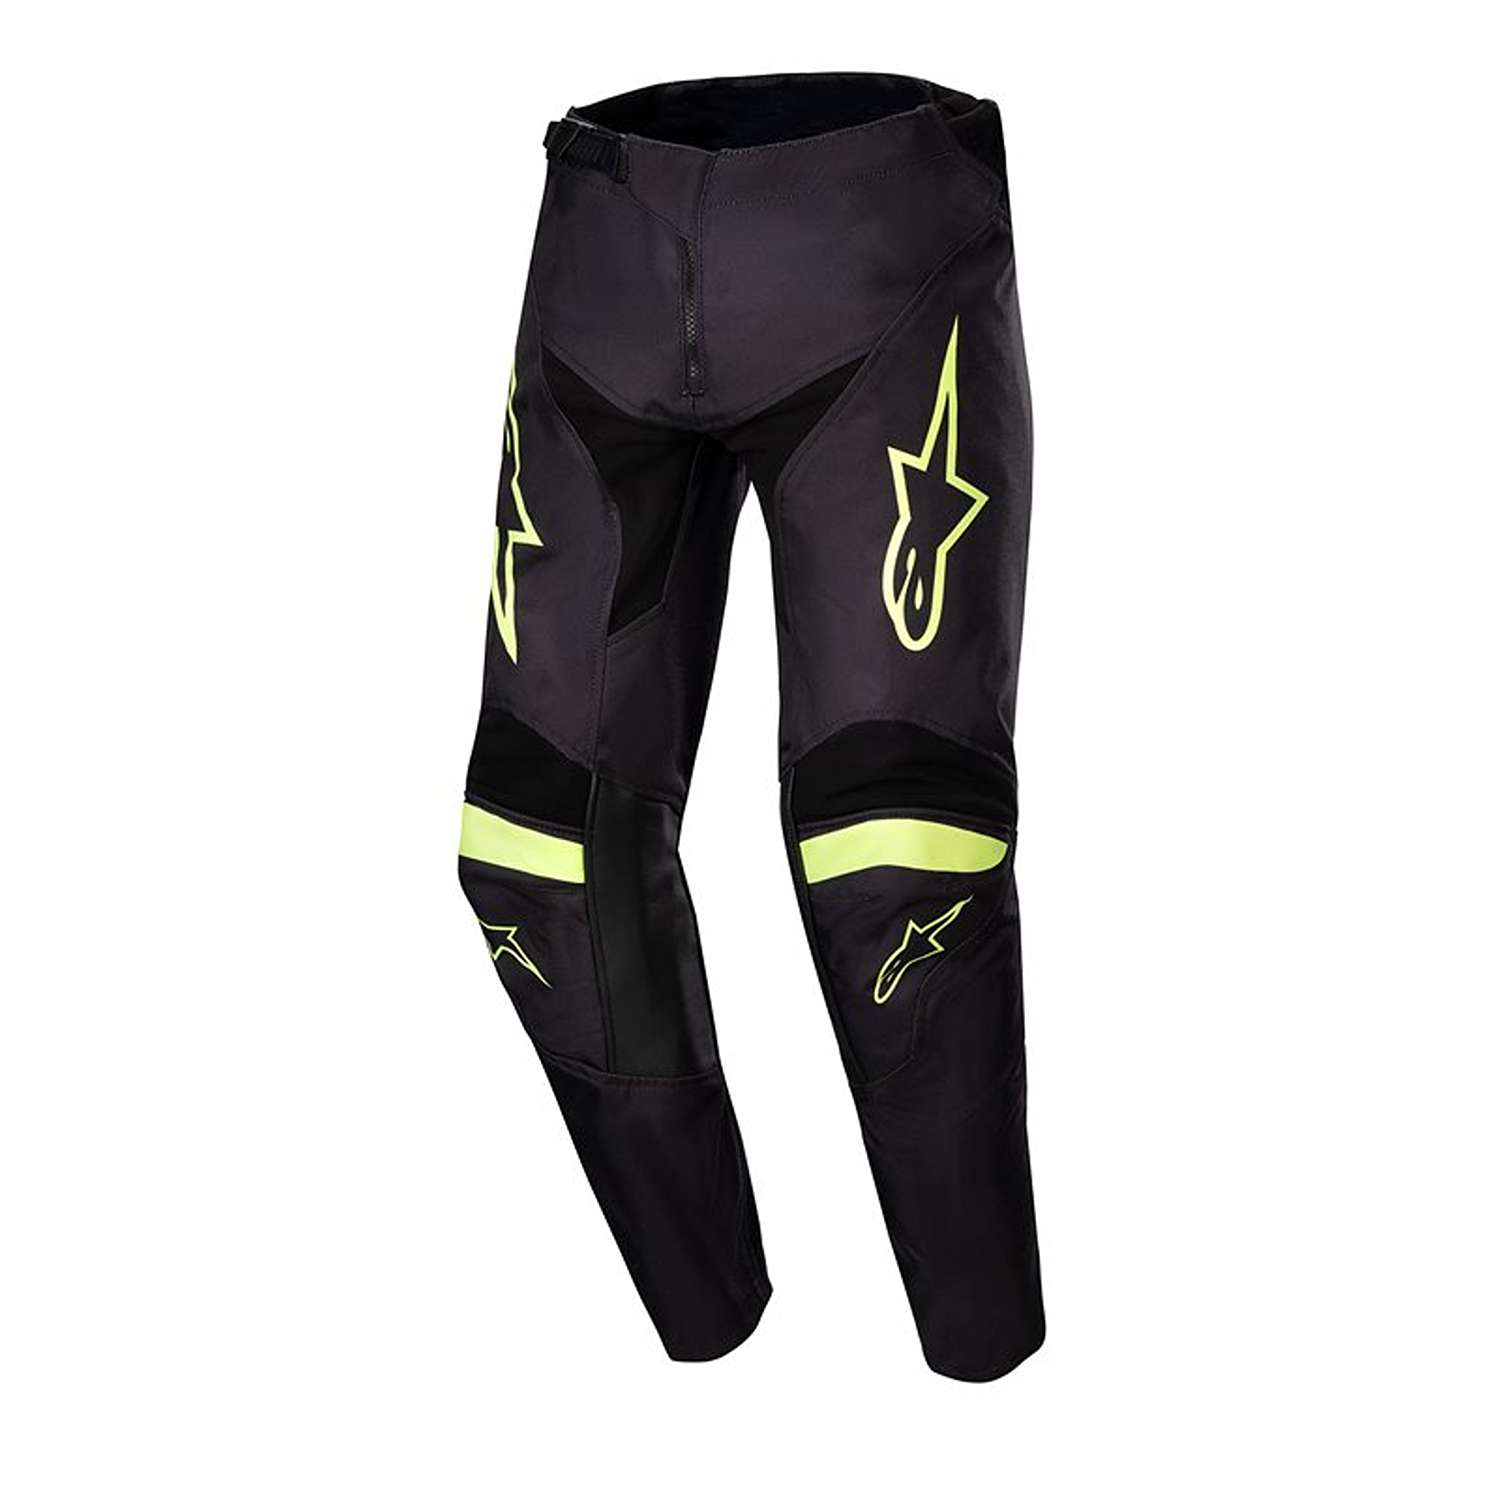 Image of Alpinestars Youth Racer Lurv Pants Black Yellow Fluo Taille 24